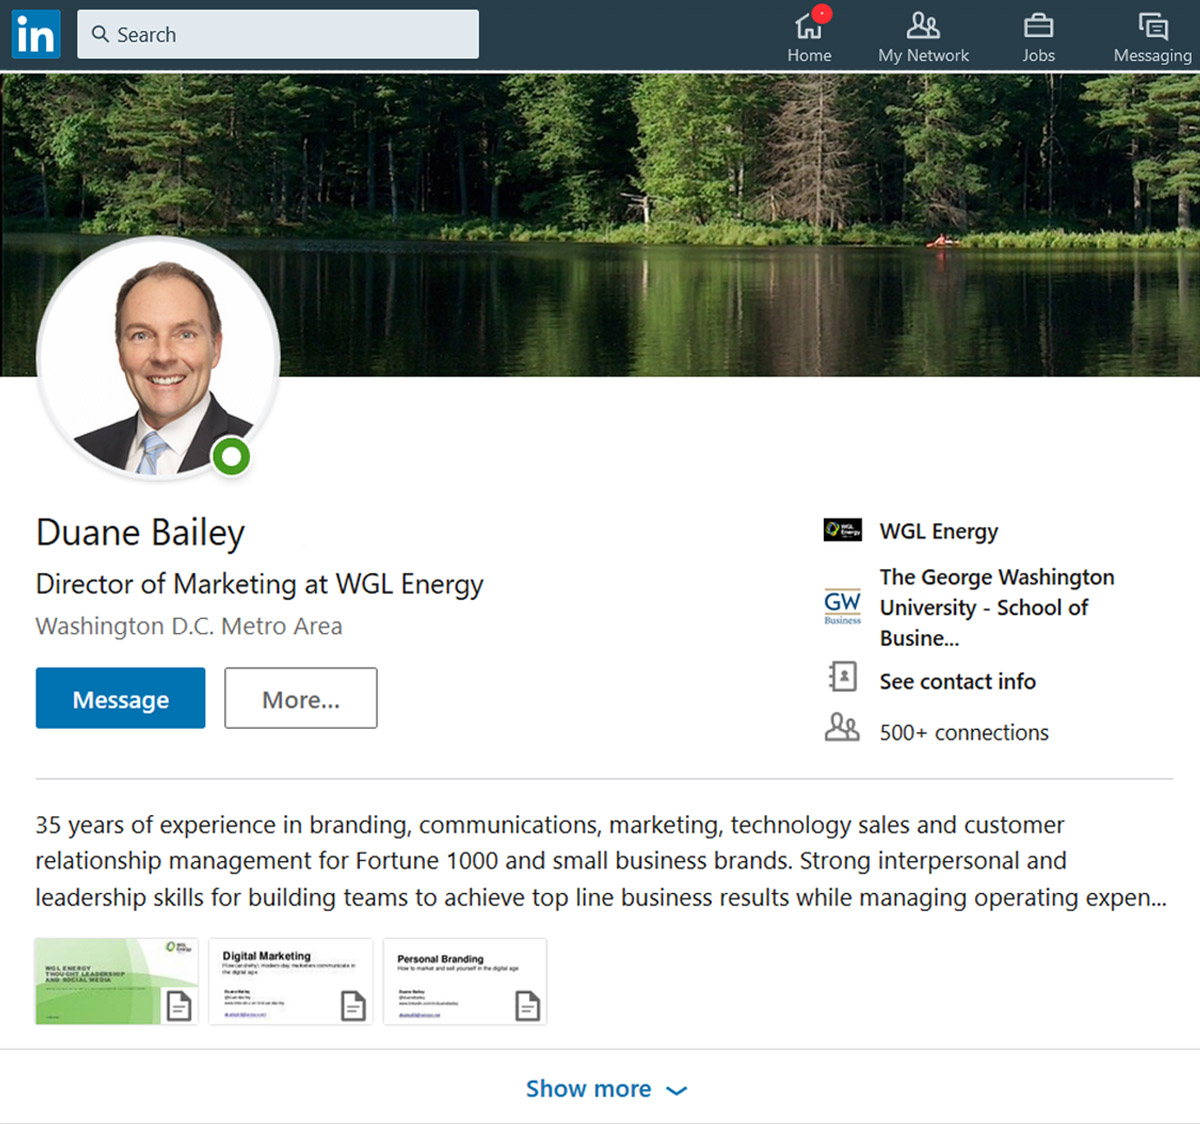 personal branding of linkedin profile, picture of duane's profile and background